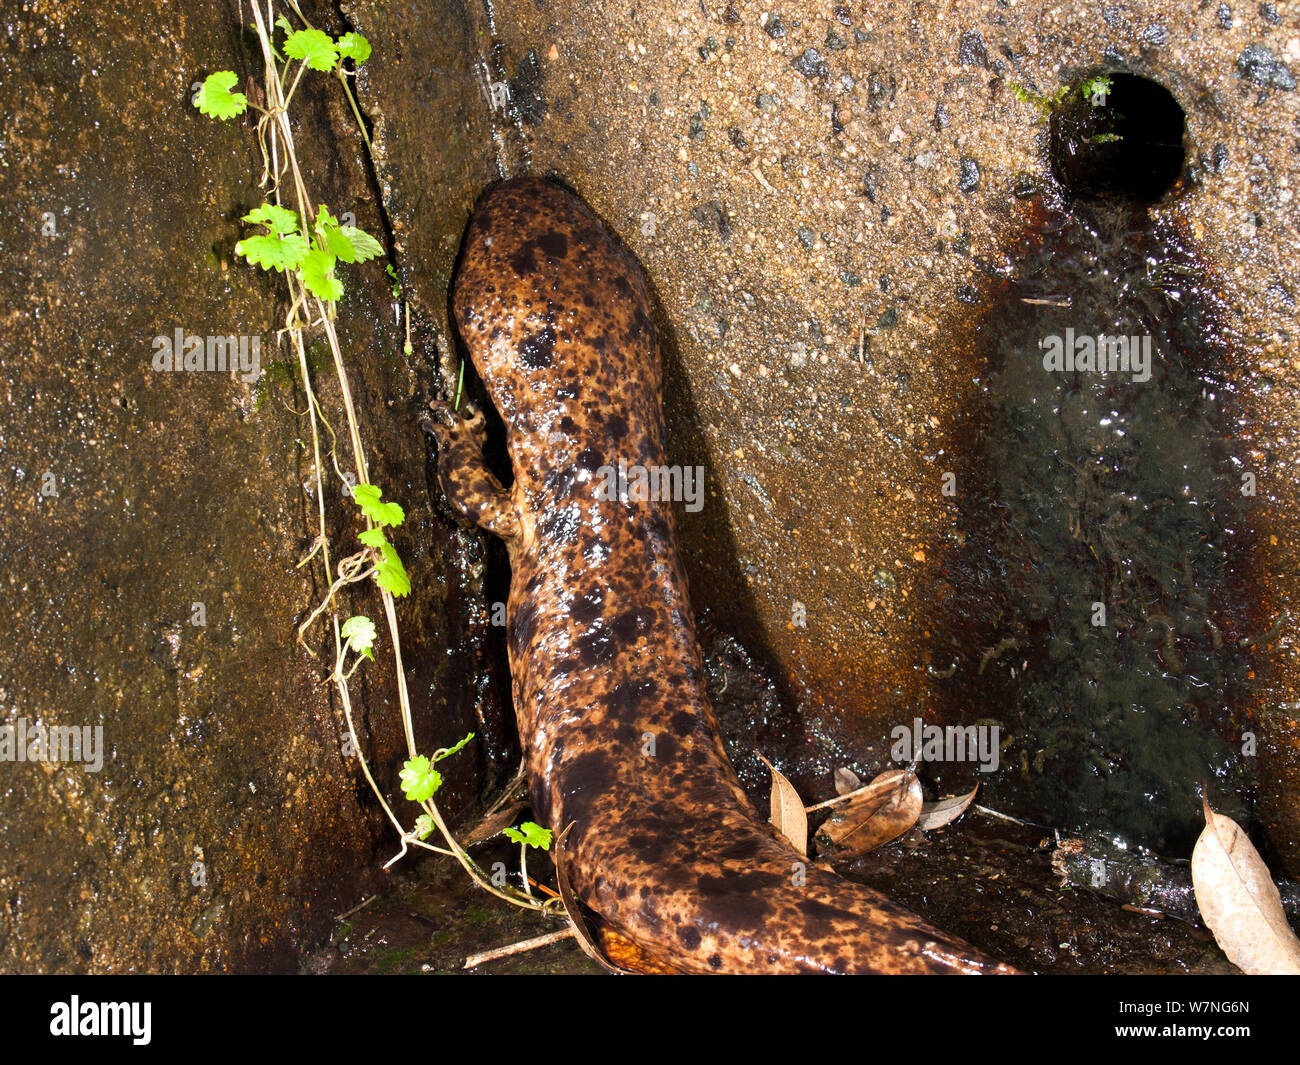 Japanese giant salamander (Andrias japonicus)  prevented from migrating by a dam, Japan, August 2008 Stock Photo